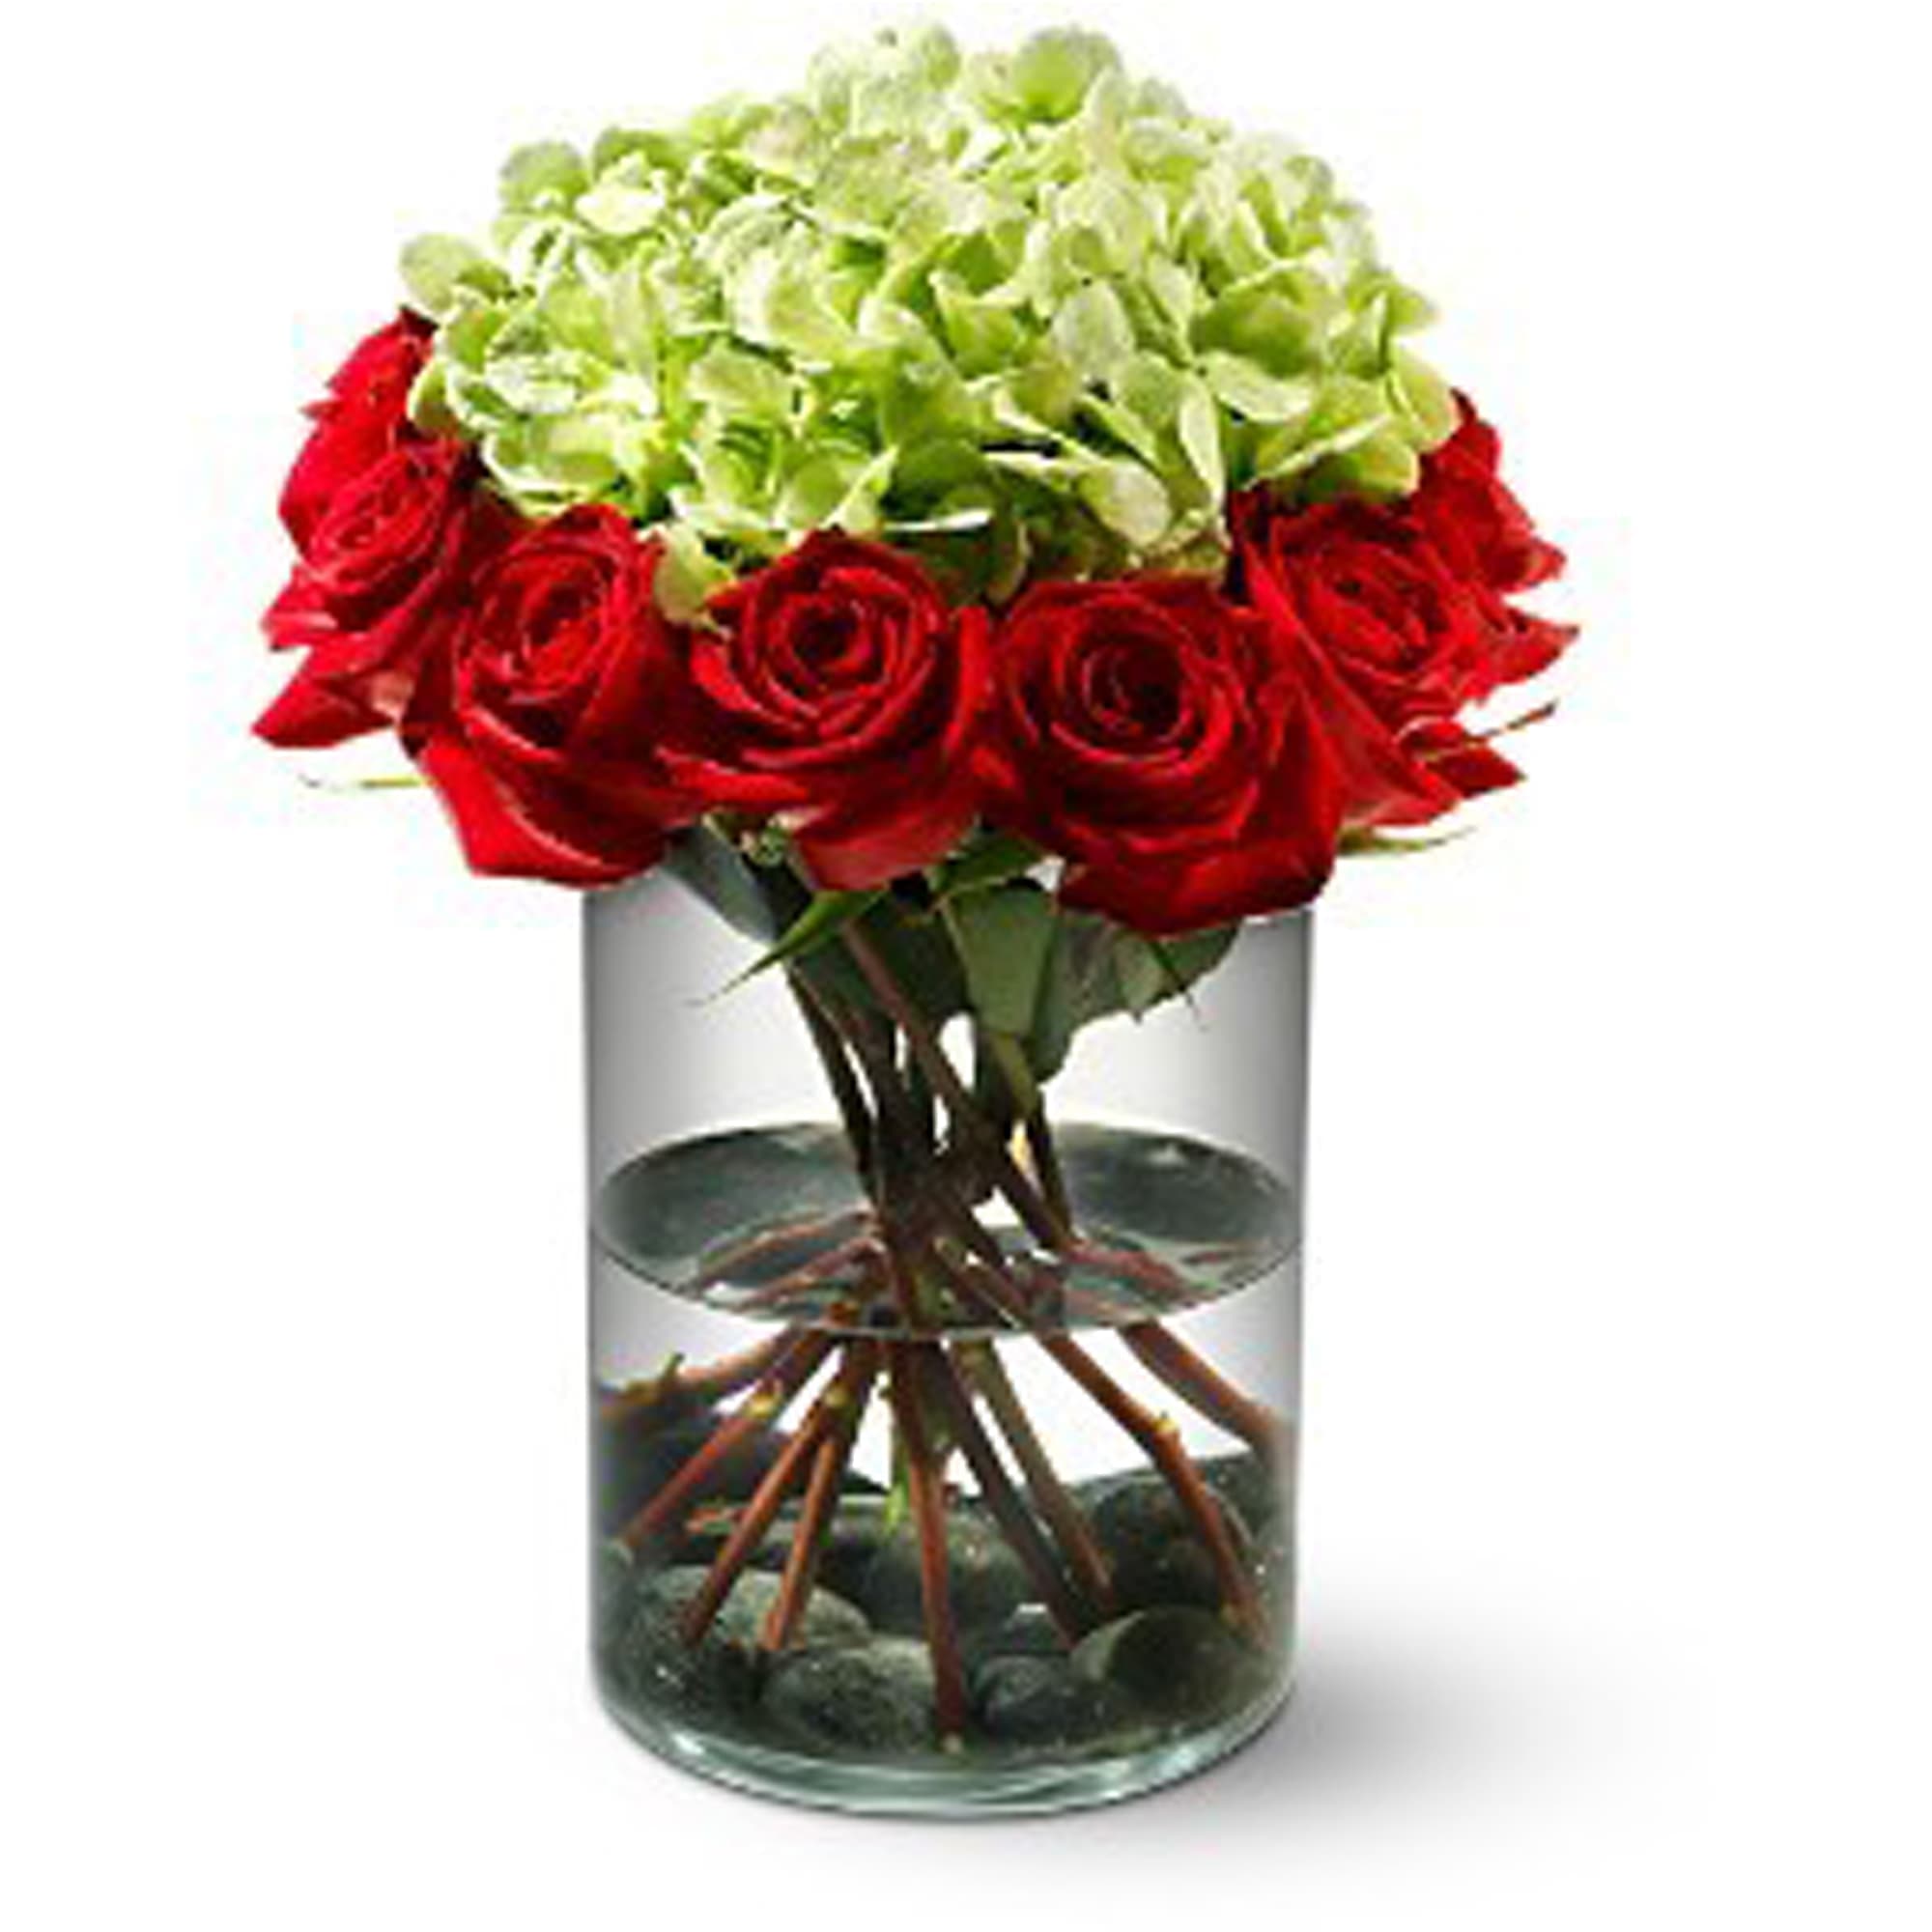 Ring of Fire - For a sophisticated and unexpected gift, choose this striking floral arrangement of fiery red roses - arranged in a ring around a cloud of fluffy green hydrangea and resting on a bed of black river rocks. It's sure to make an impression.    A dozen red roses and green hydrangea â plus black river rocks â are delivered in a glass cylinder vase.    Approximately 10&quot; (W) x 9&quot; (H)    Orientation: All-Around    As Shown : TFWEB117